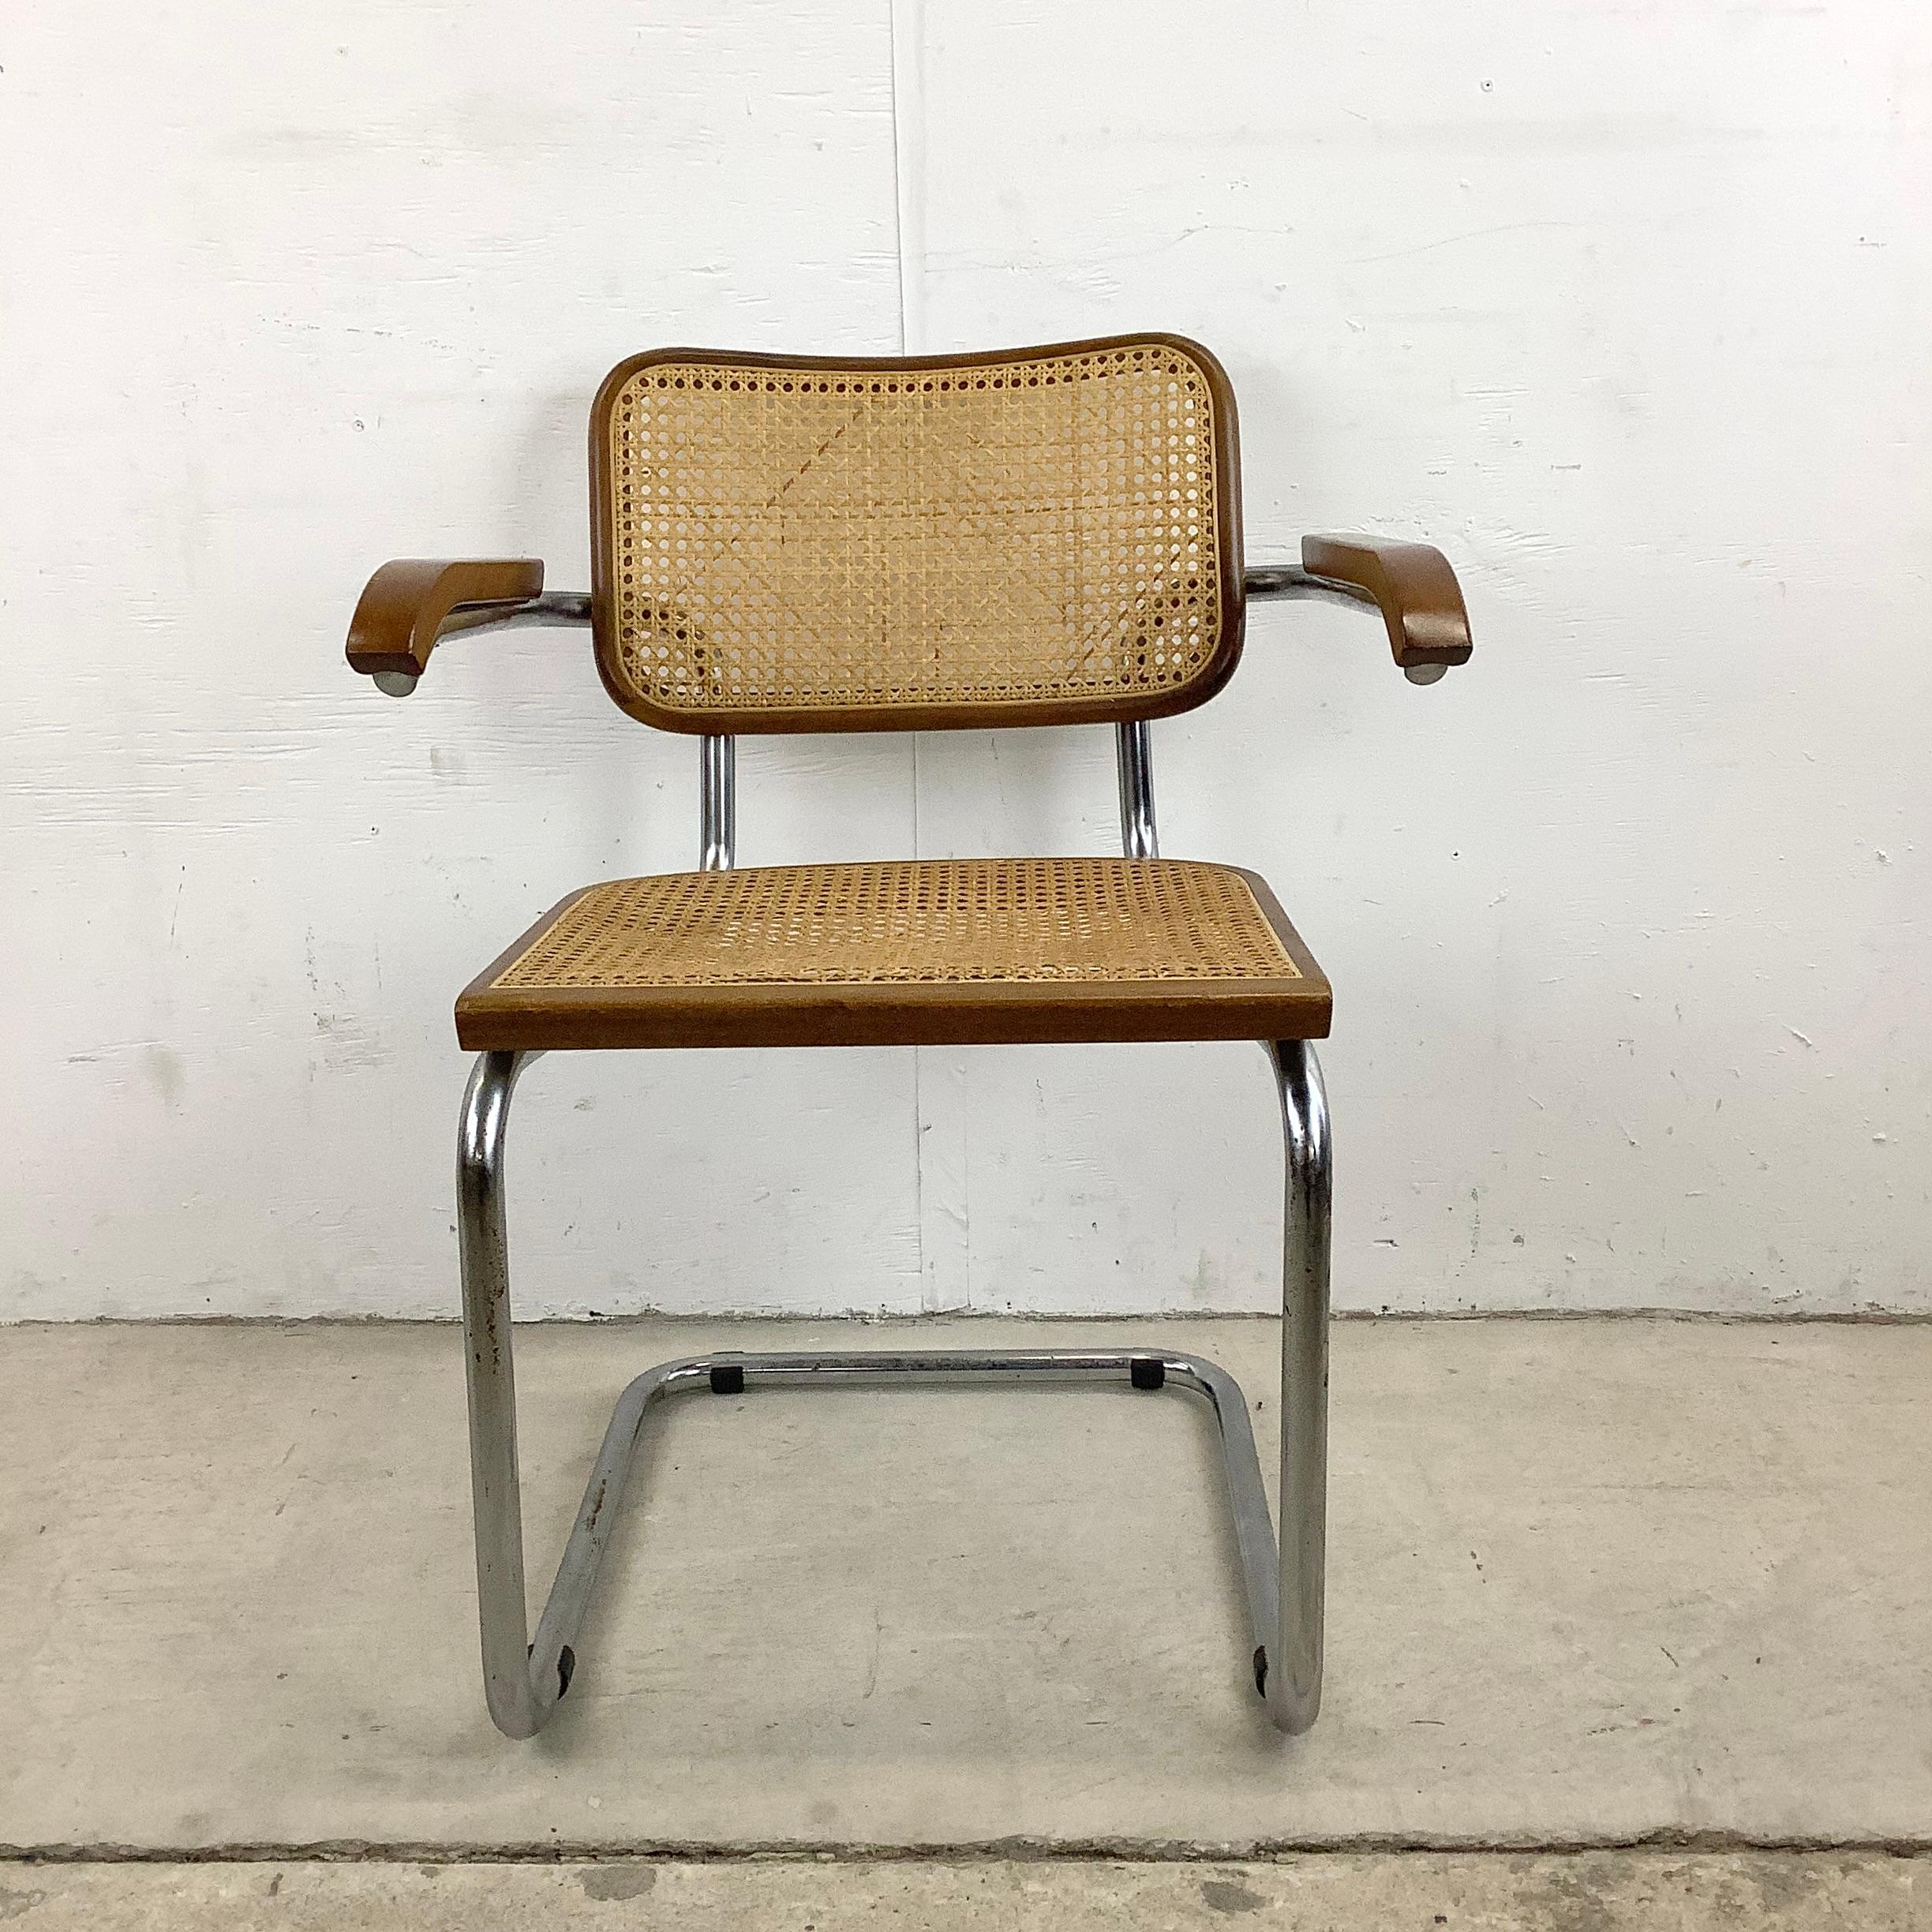 Italian Midcentury Cesca Style Cane Seat Dining Chair, Made in Italy